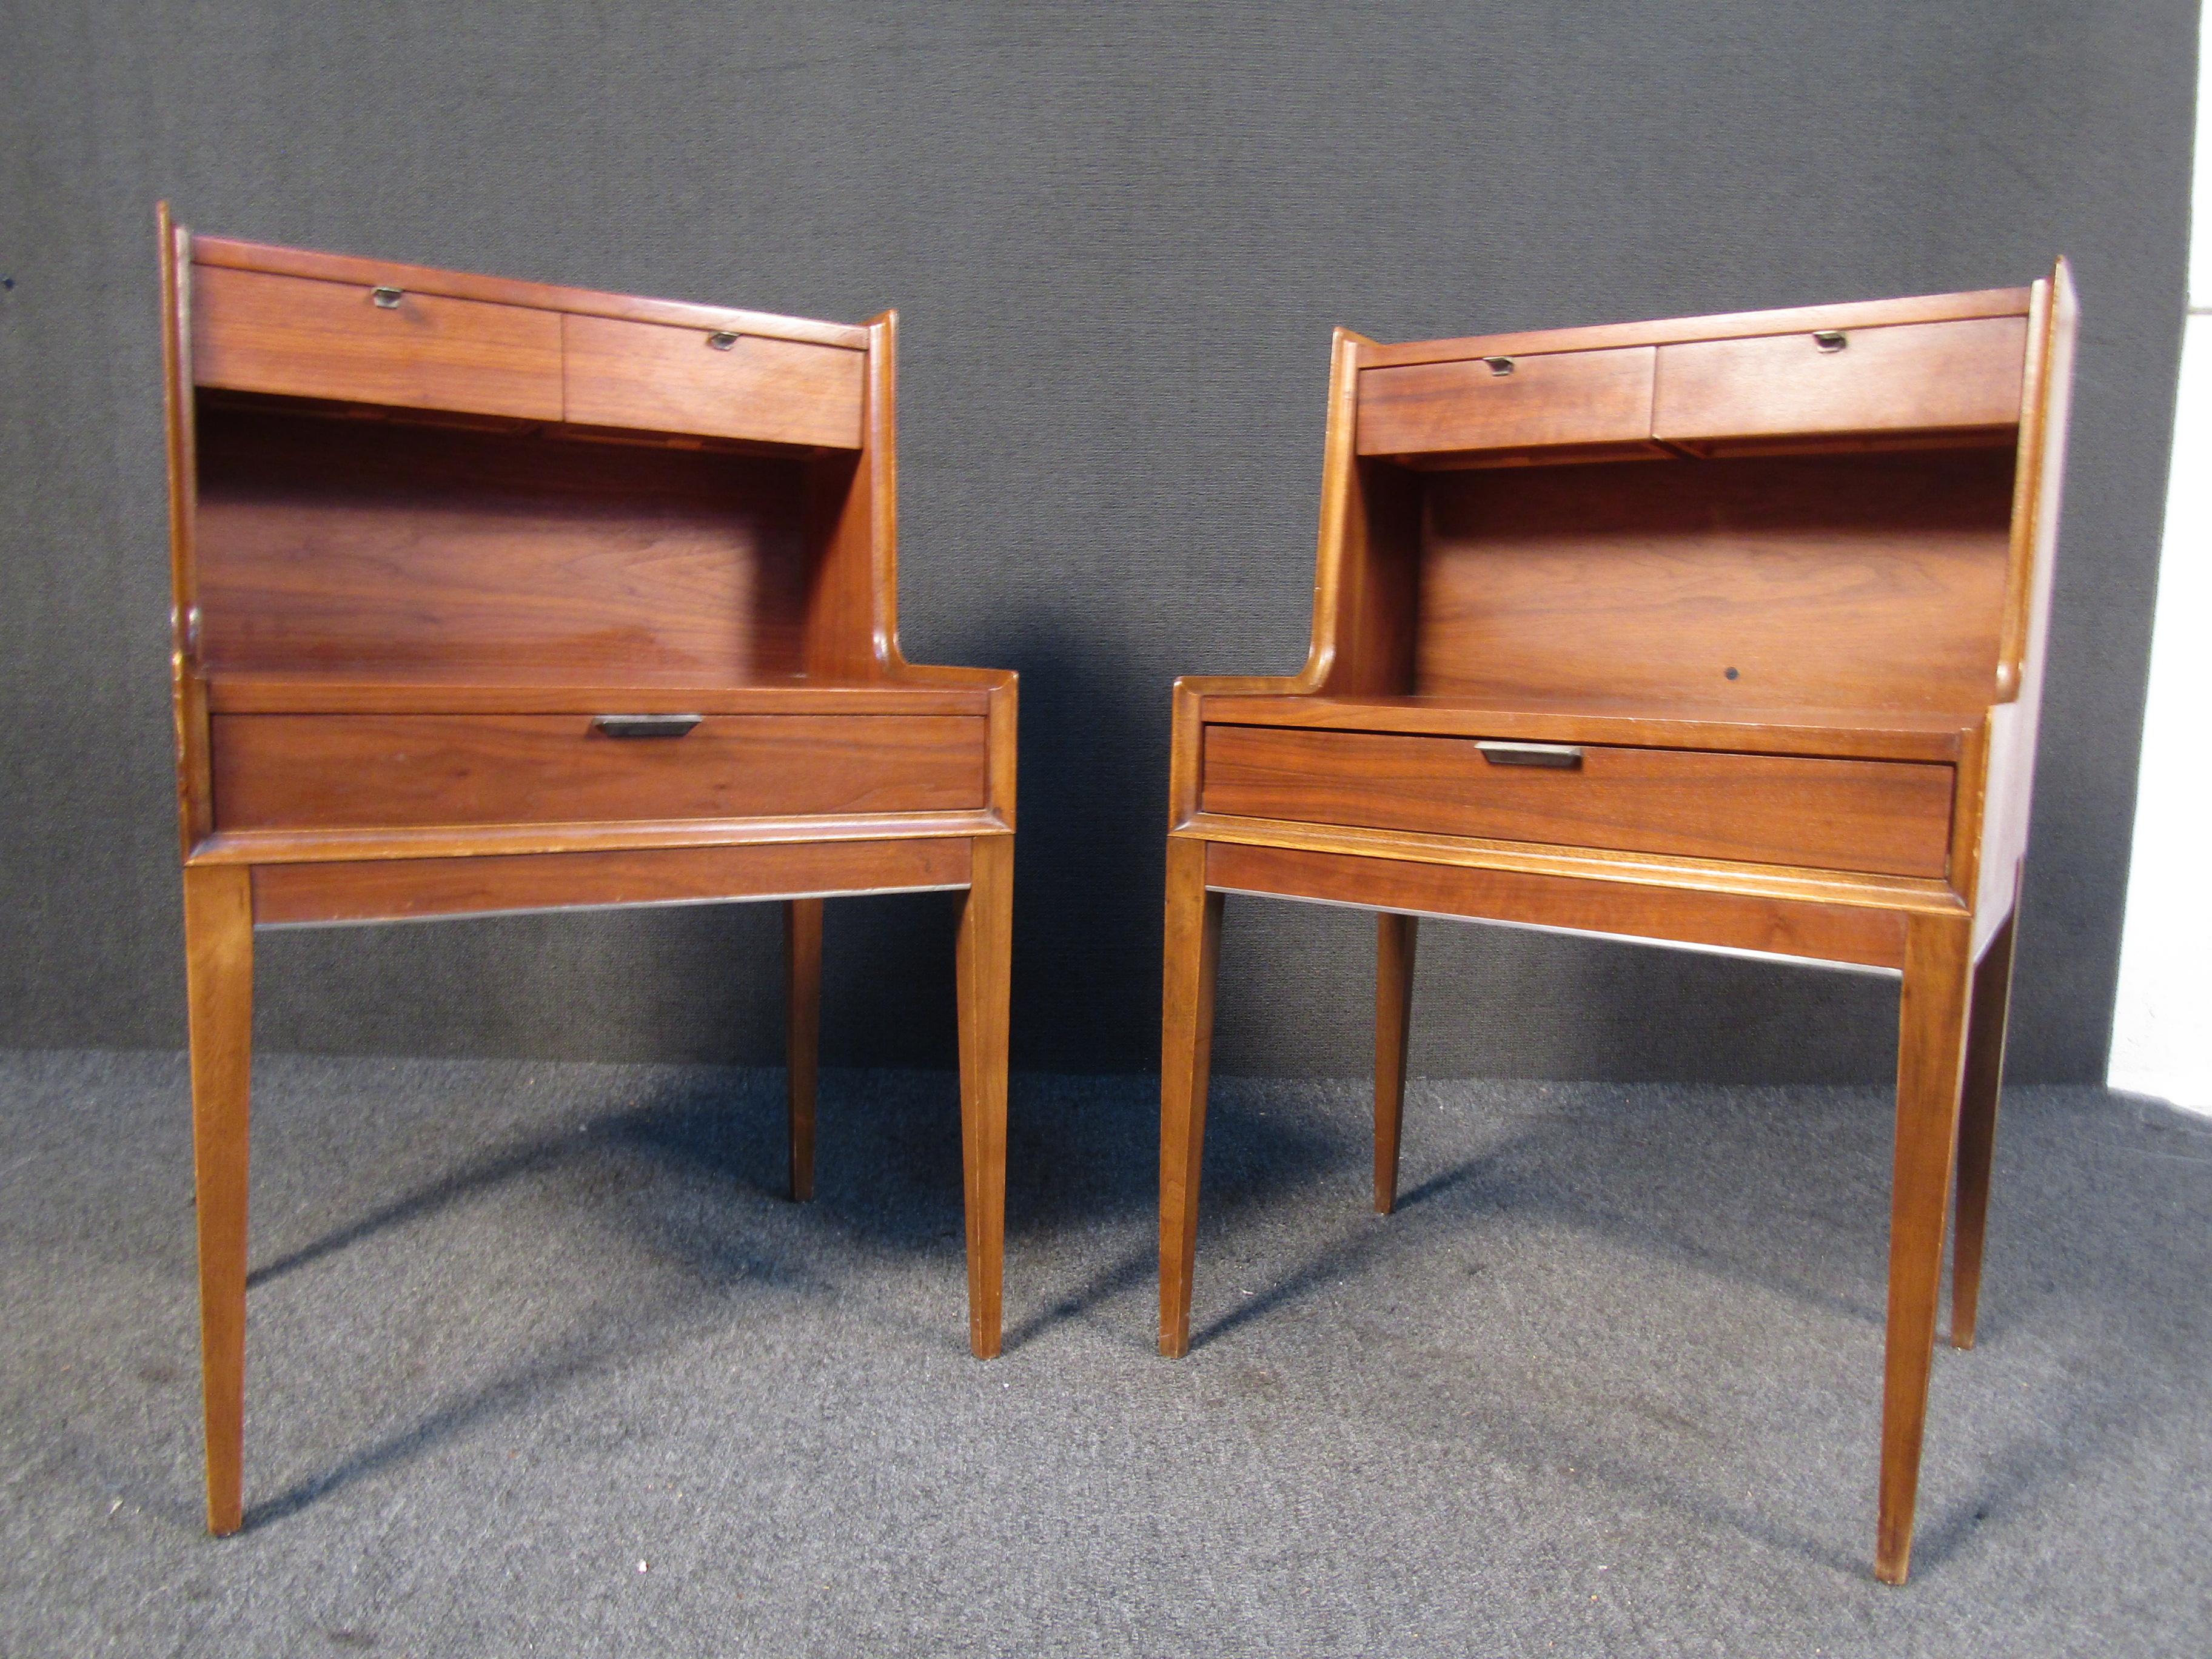 A pair of vintage Cavalier nightstands featuring tall legs and three drawers in a two-tier fashion. Wether its the aesthetic wood finish or elegant appearance these nightstands will make a great addition to any home or office space. 
Please confirm